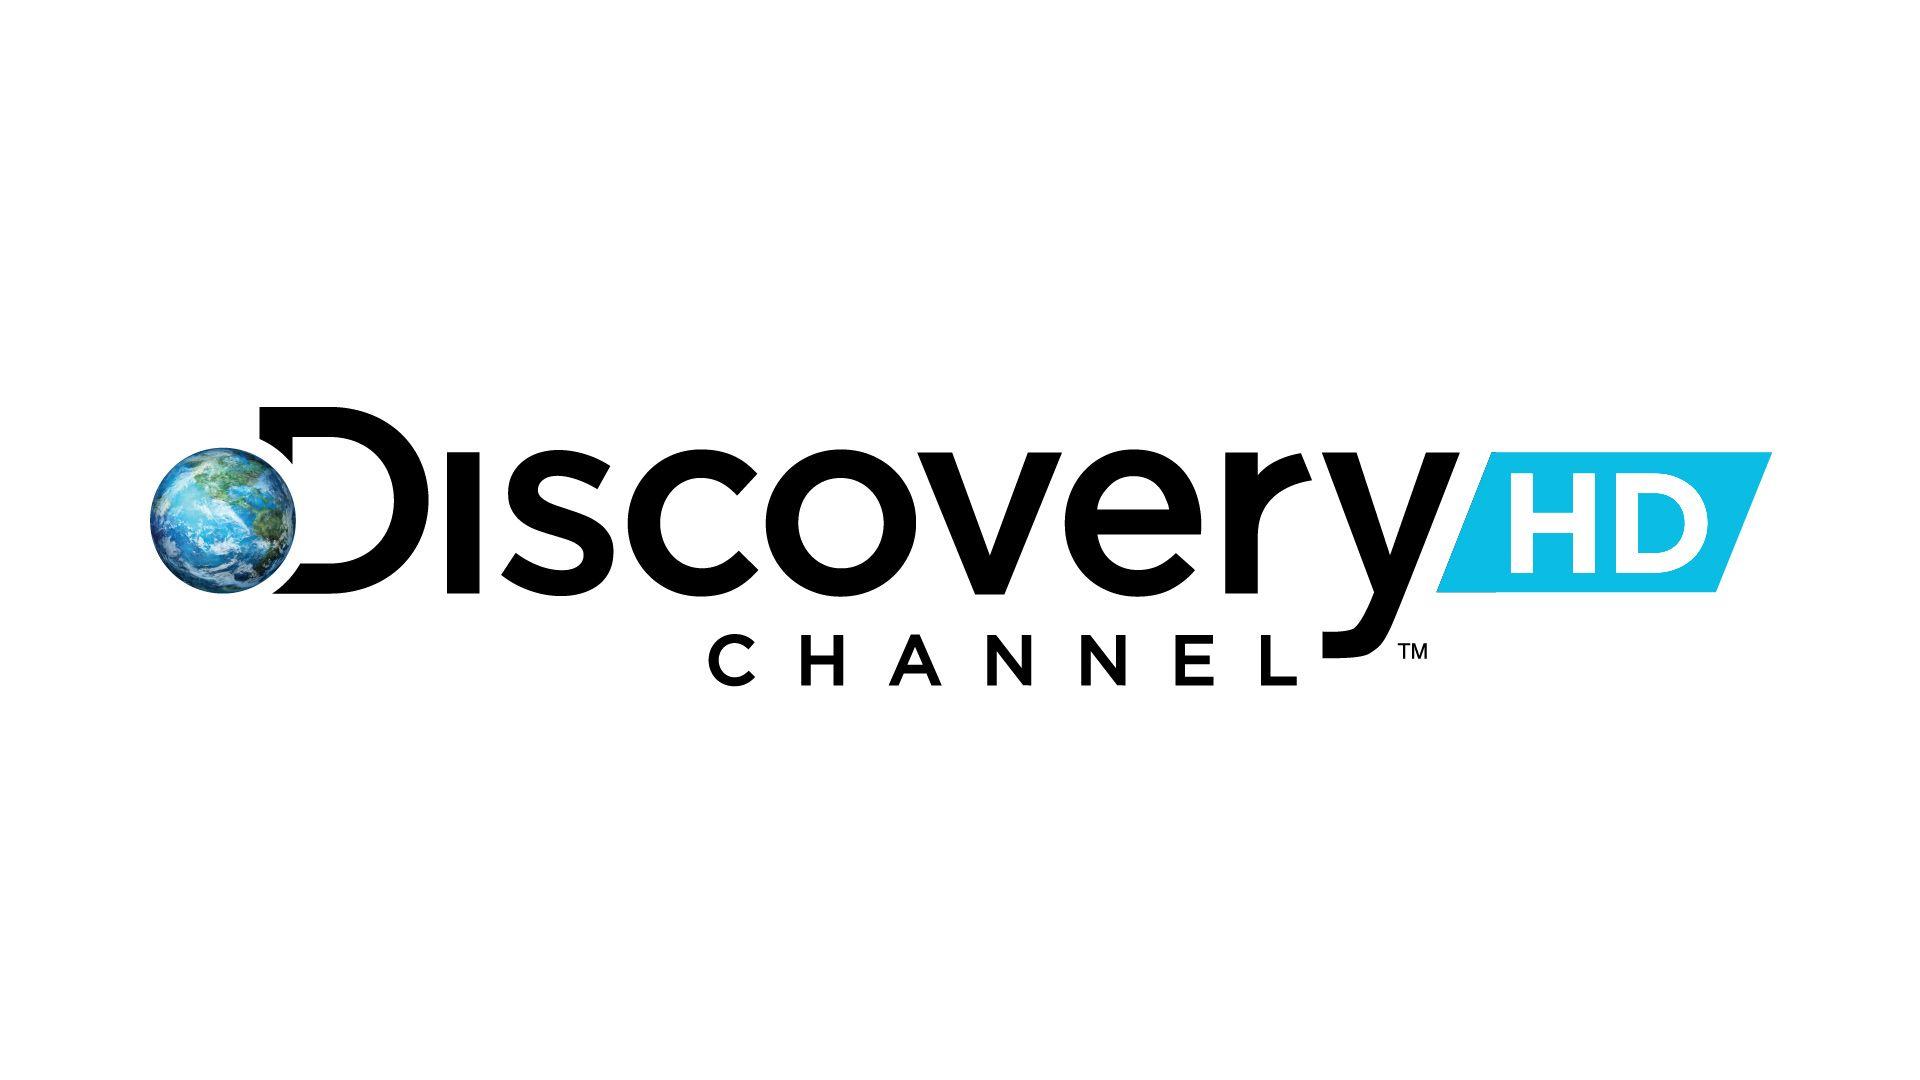 Discovery HD Showcase Channel Wallpaper Px 1920x1080PX Discovery